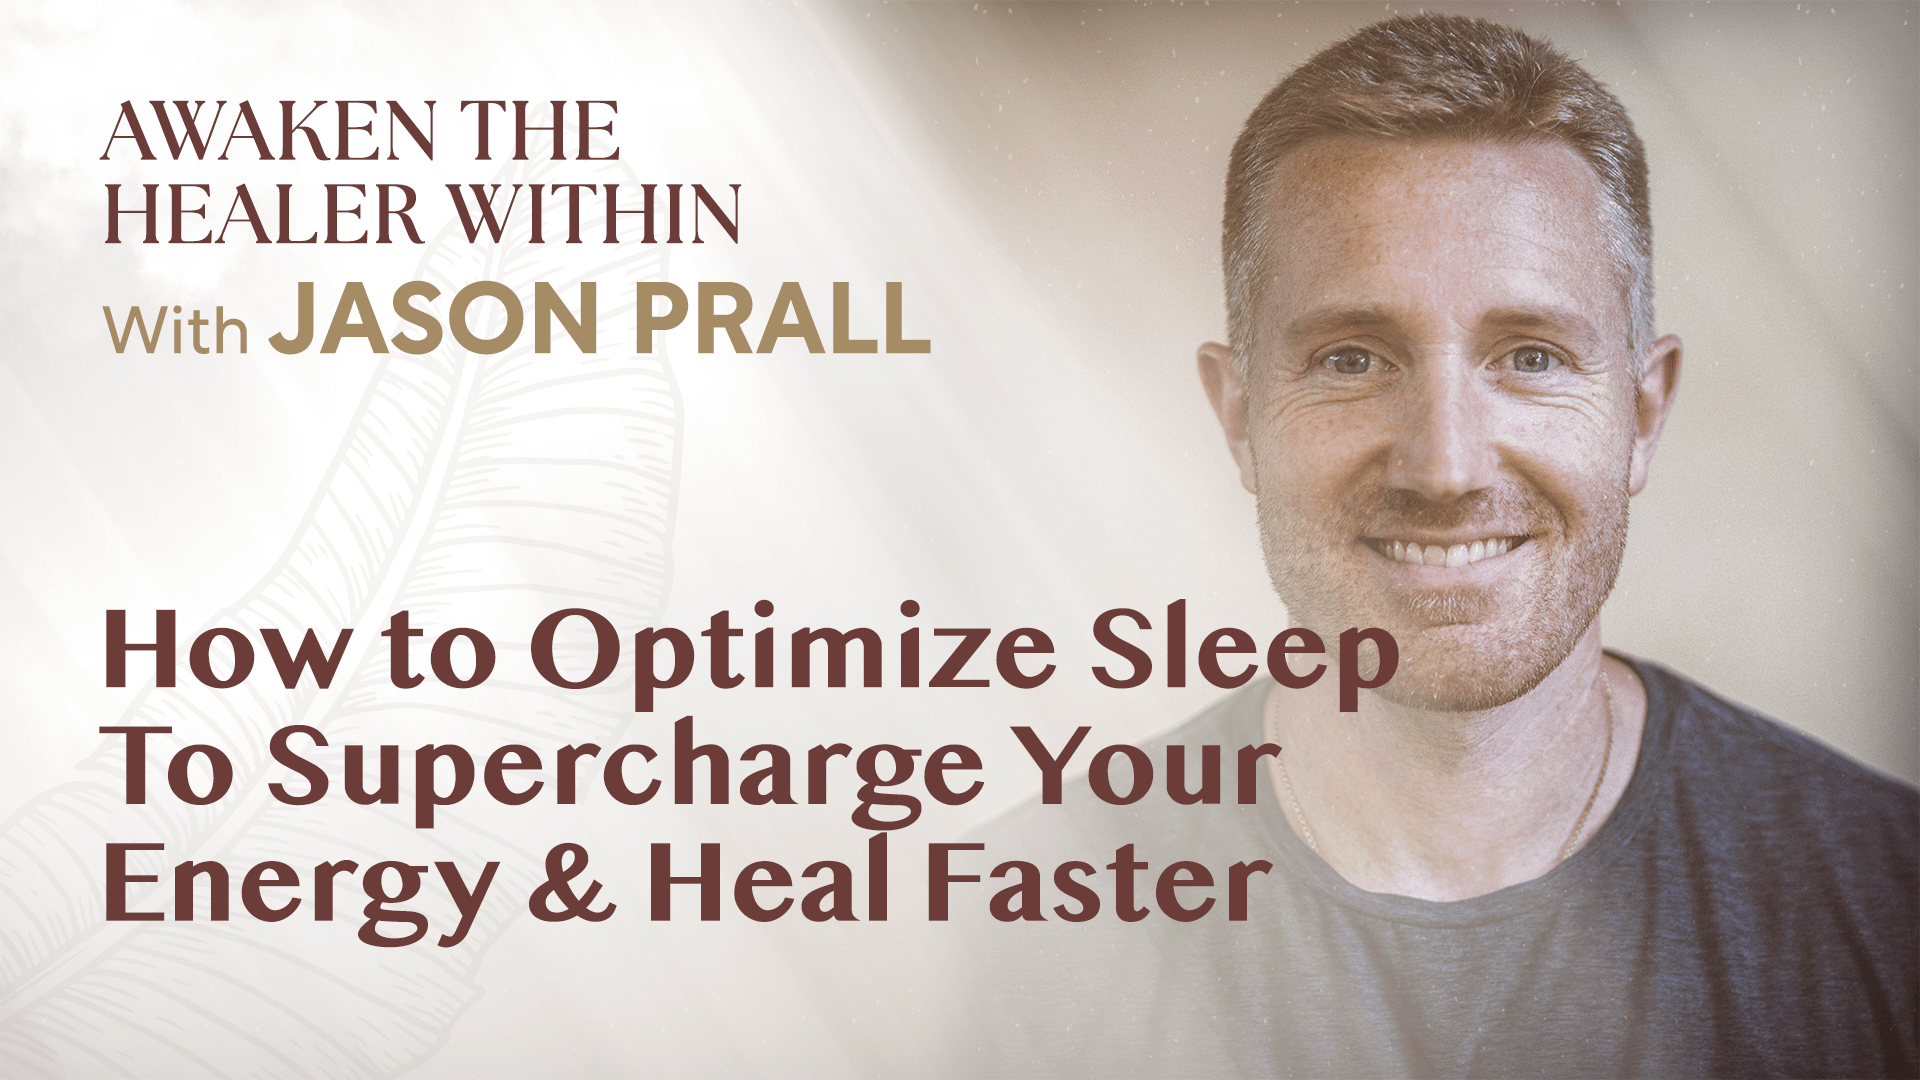 How to Optimize Sleep To Supercharge Your Energy & Heal Faster